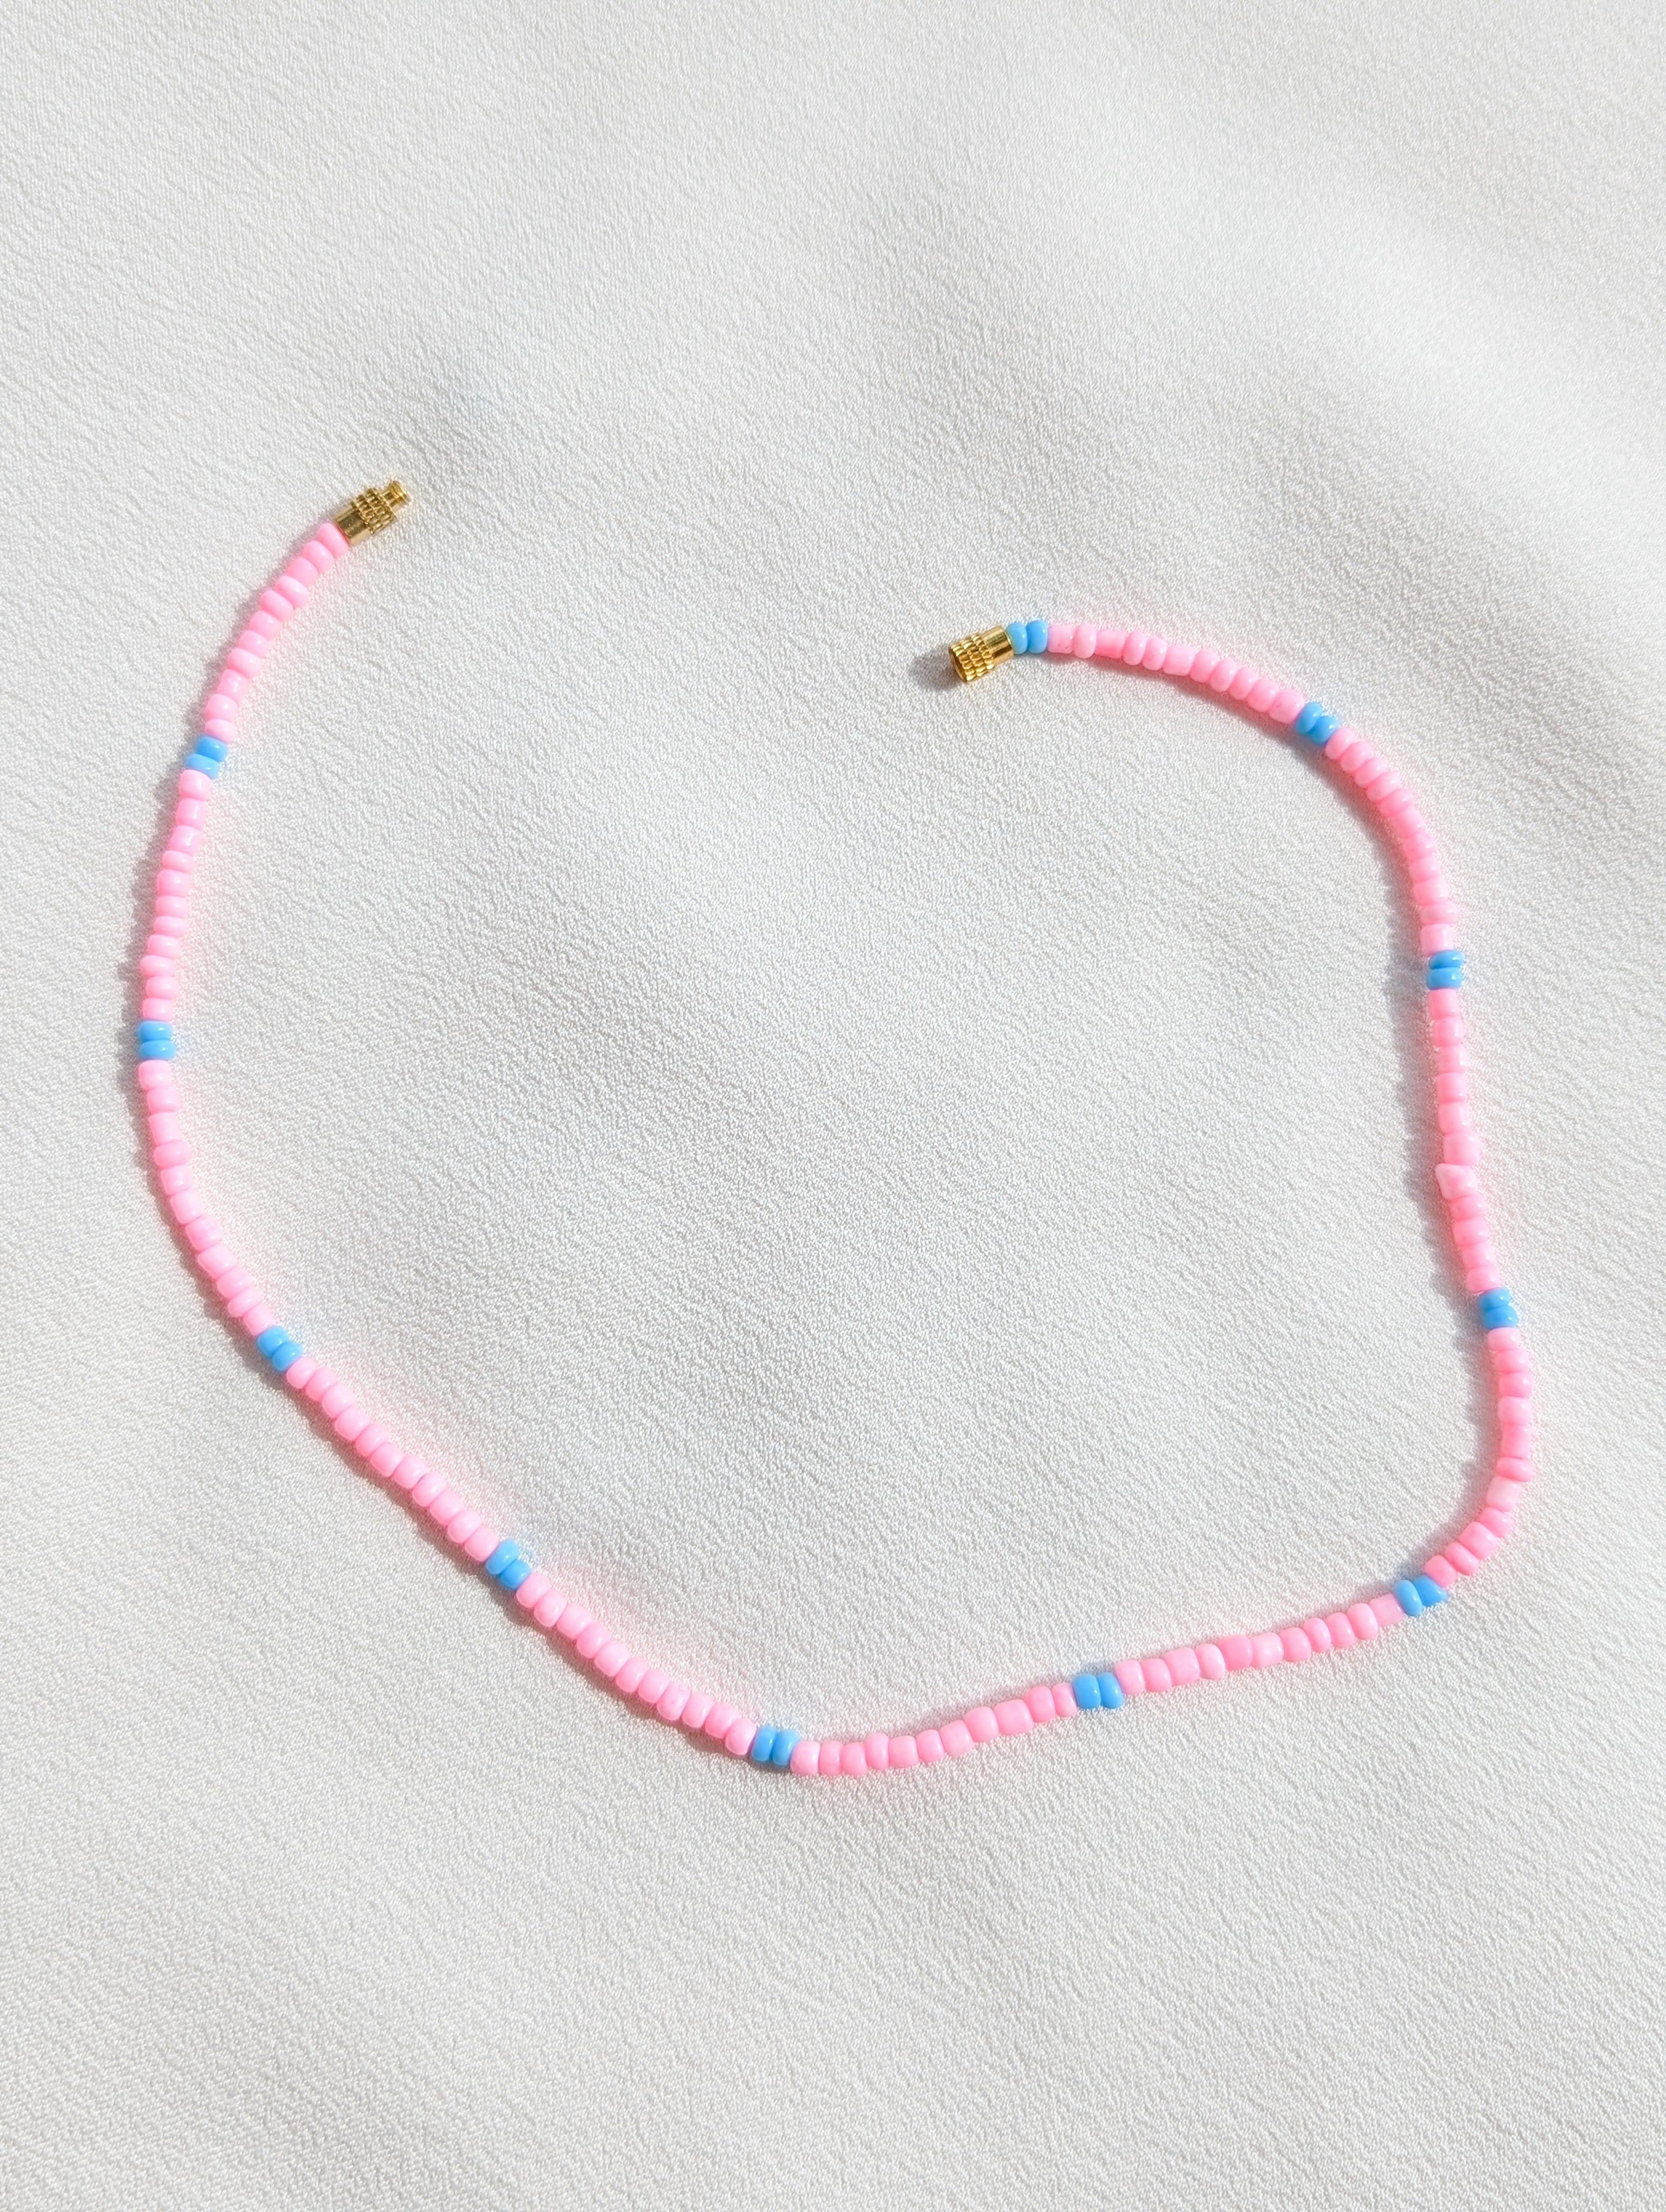 [THE ELEVEN] Necklace: Pink/Blue [Small Beads]